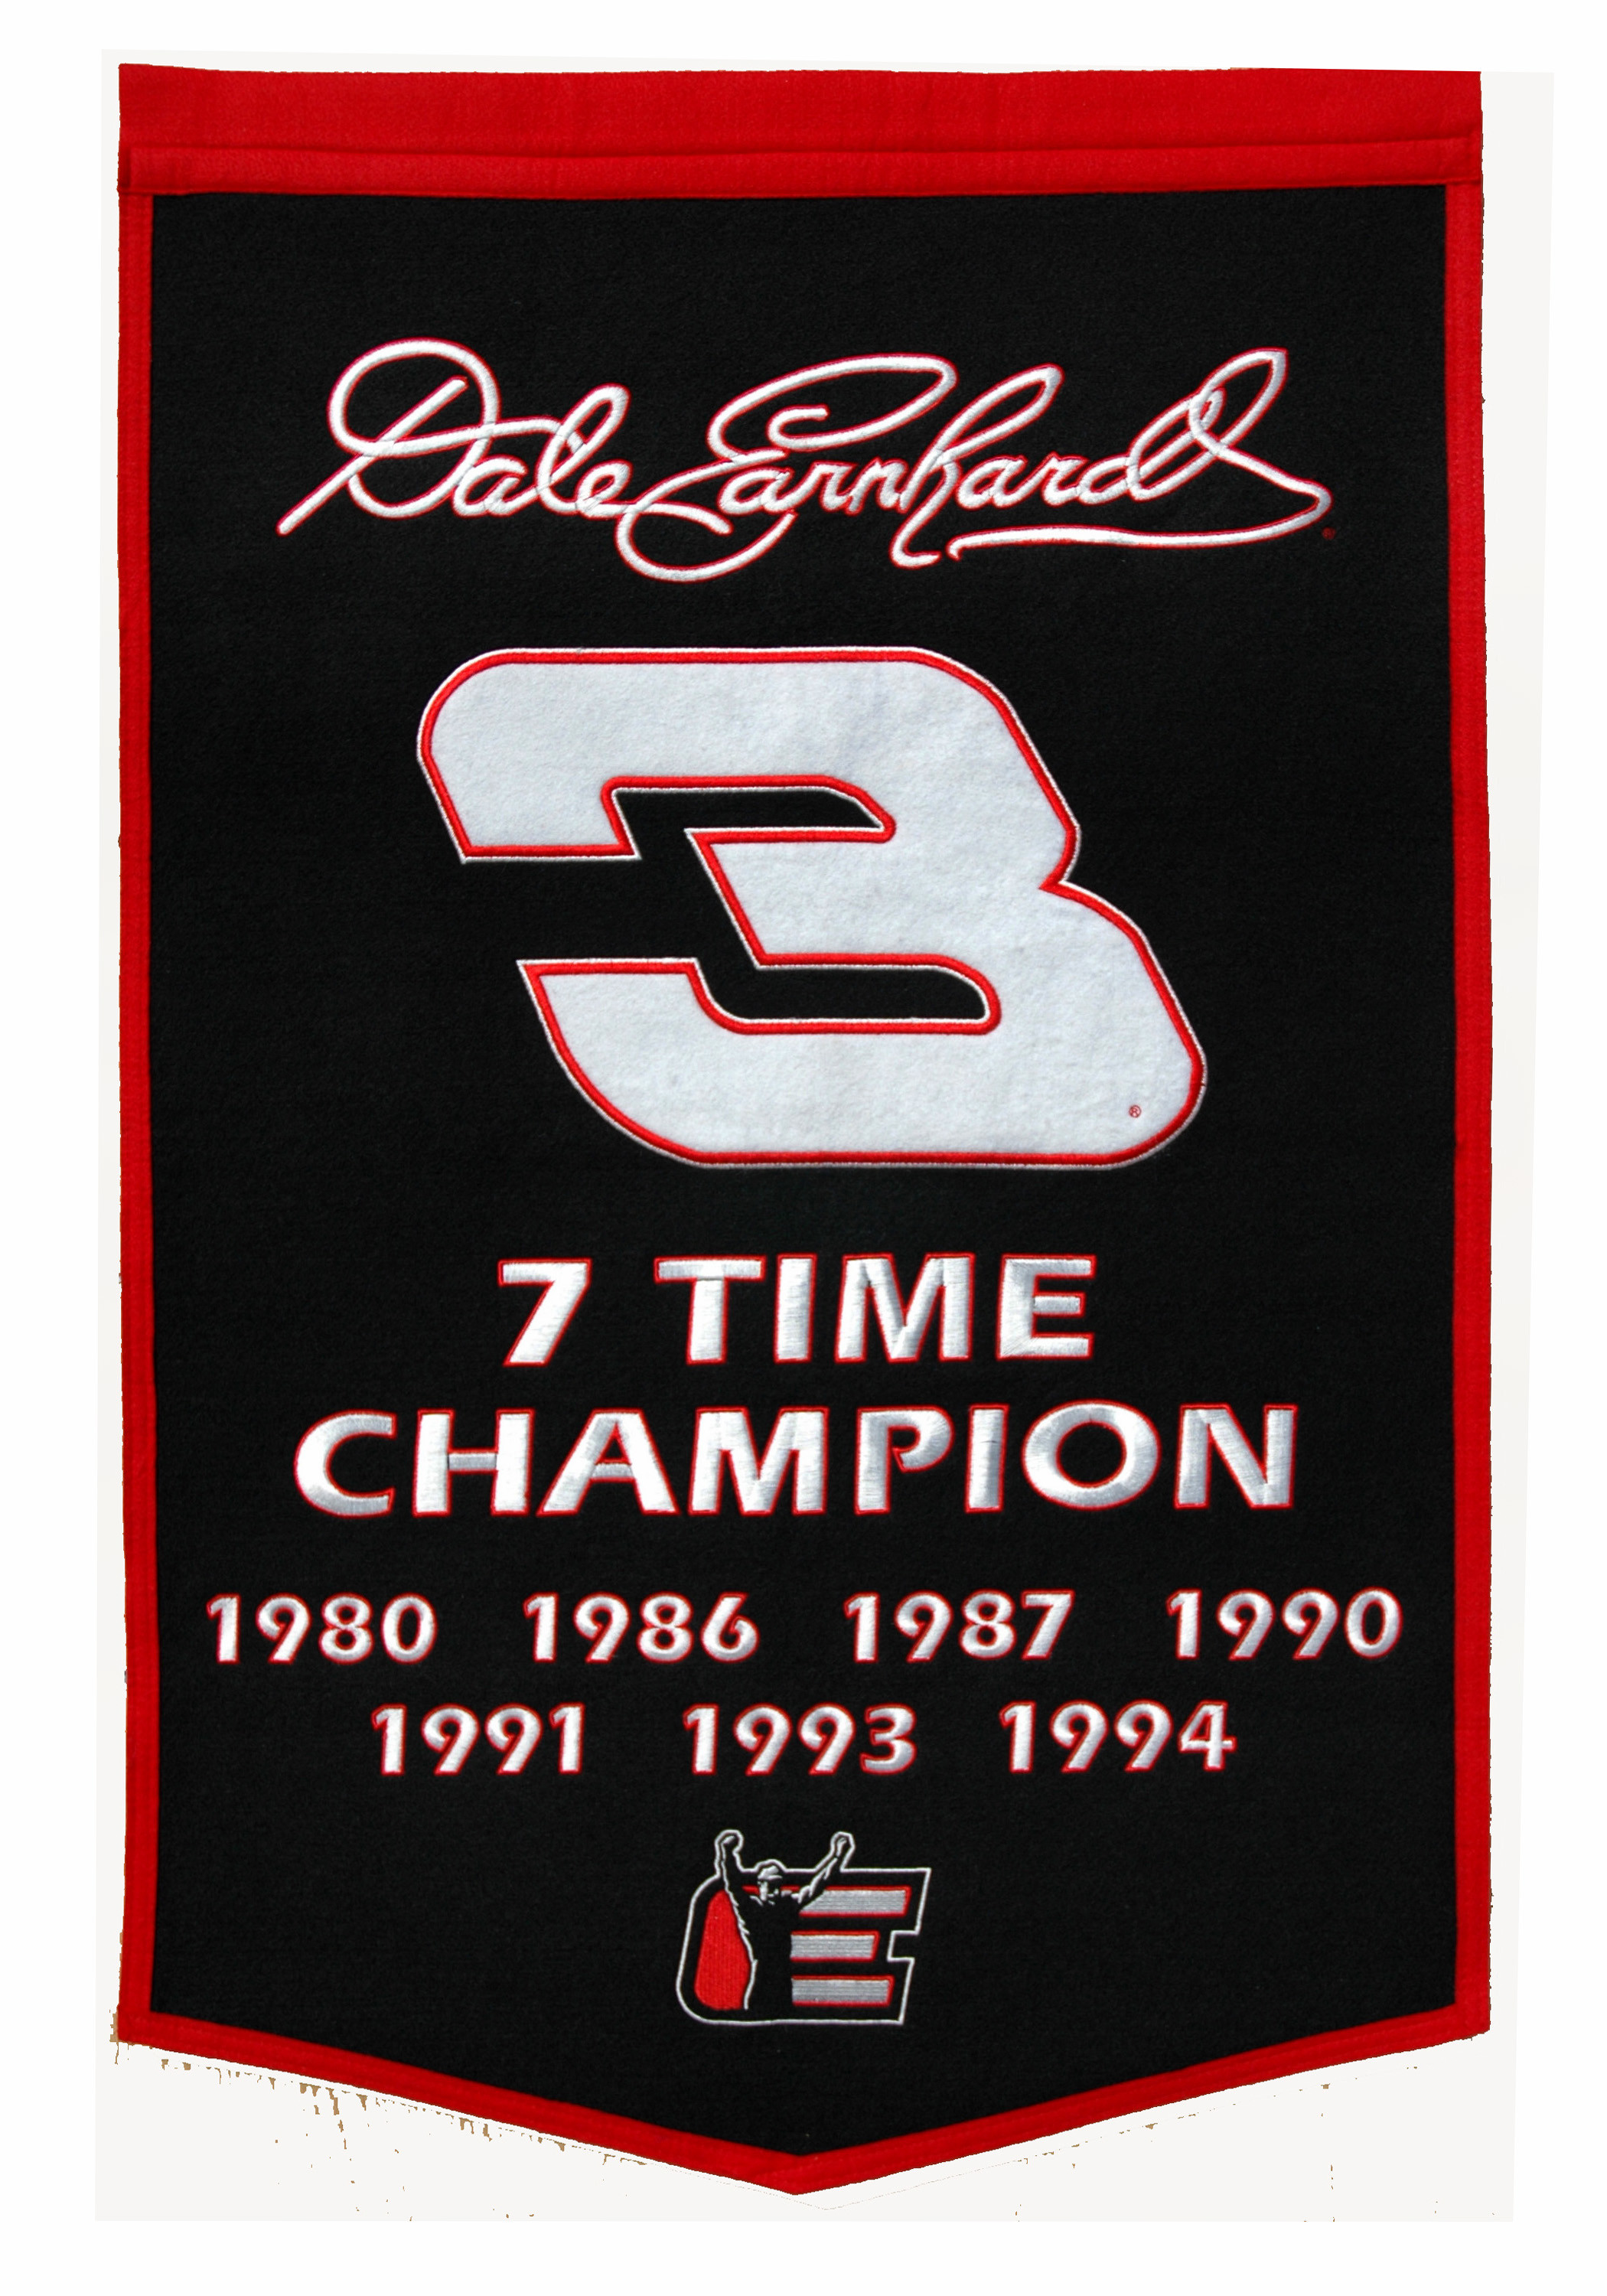 Dale Earnhardt Sr. 7 Time Cup Champion. Only one other driver can say that